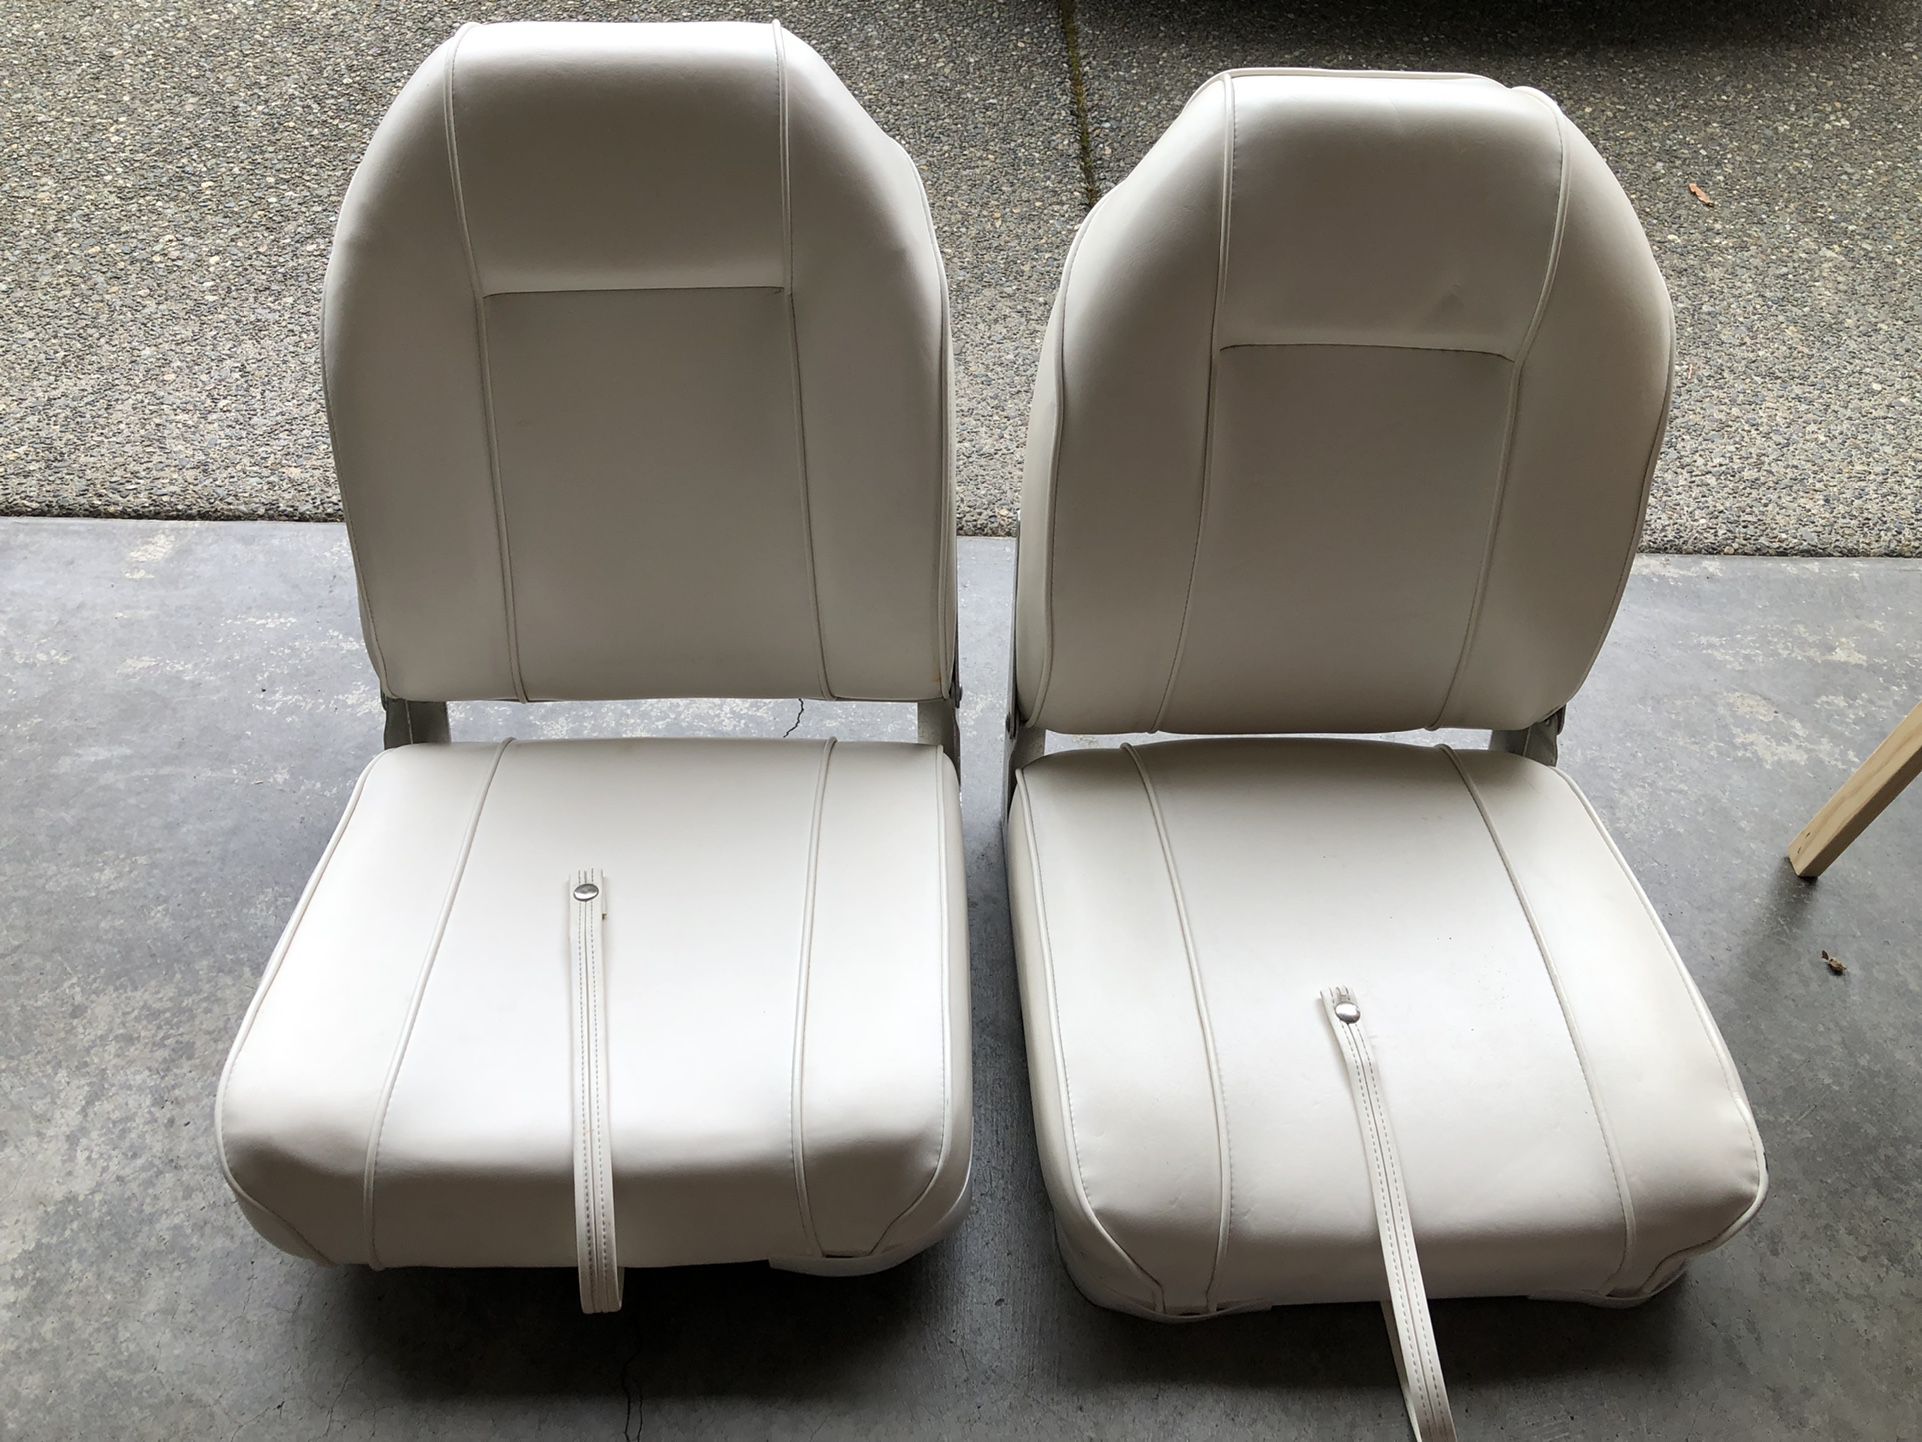 B&M White Boat Seats Wise - From 2001 Arima - Used Fair Condition 